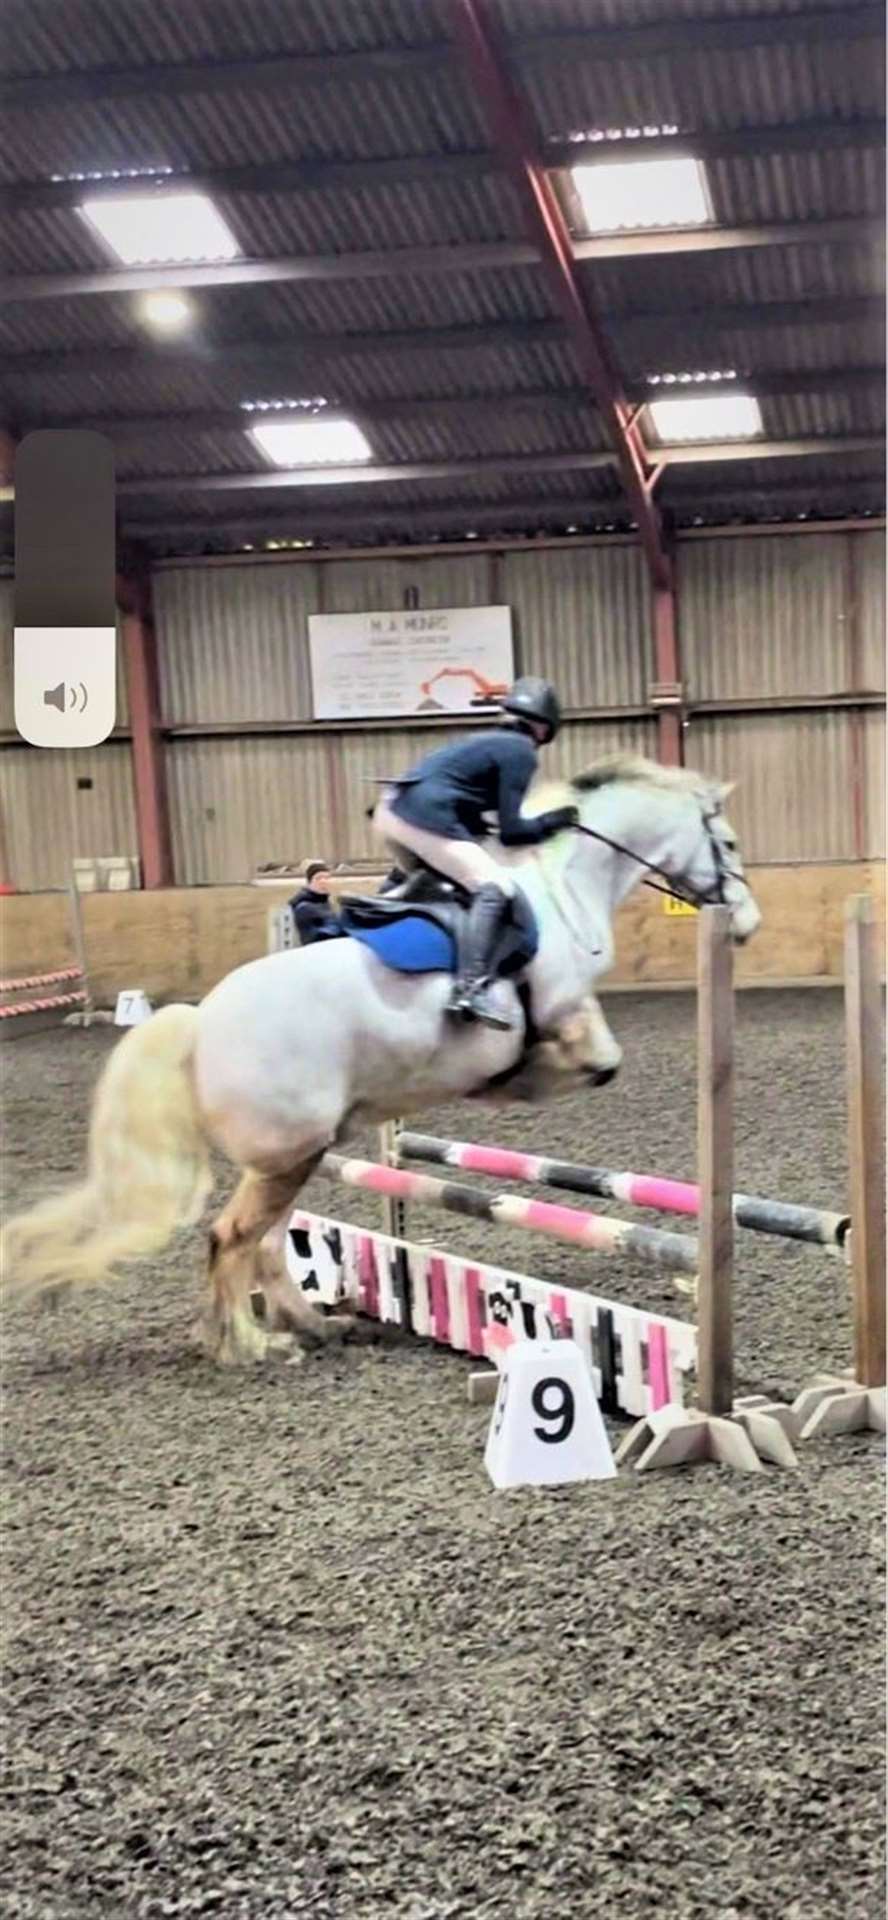 Emily Donn and Bobby's Choice have qualified to take part in the Barrier Spring Festival at Morris Equestrian Centre, Kilmarnock.